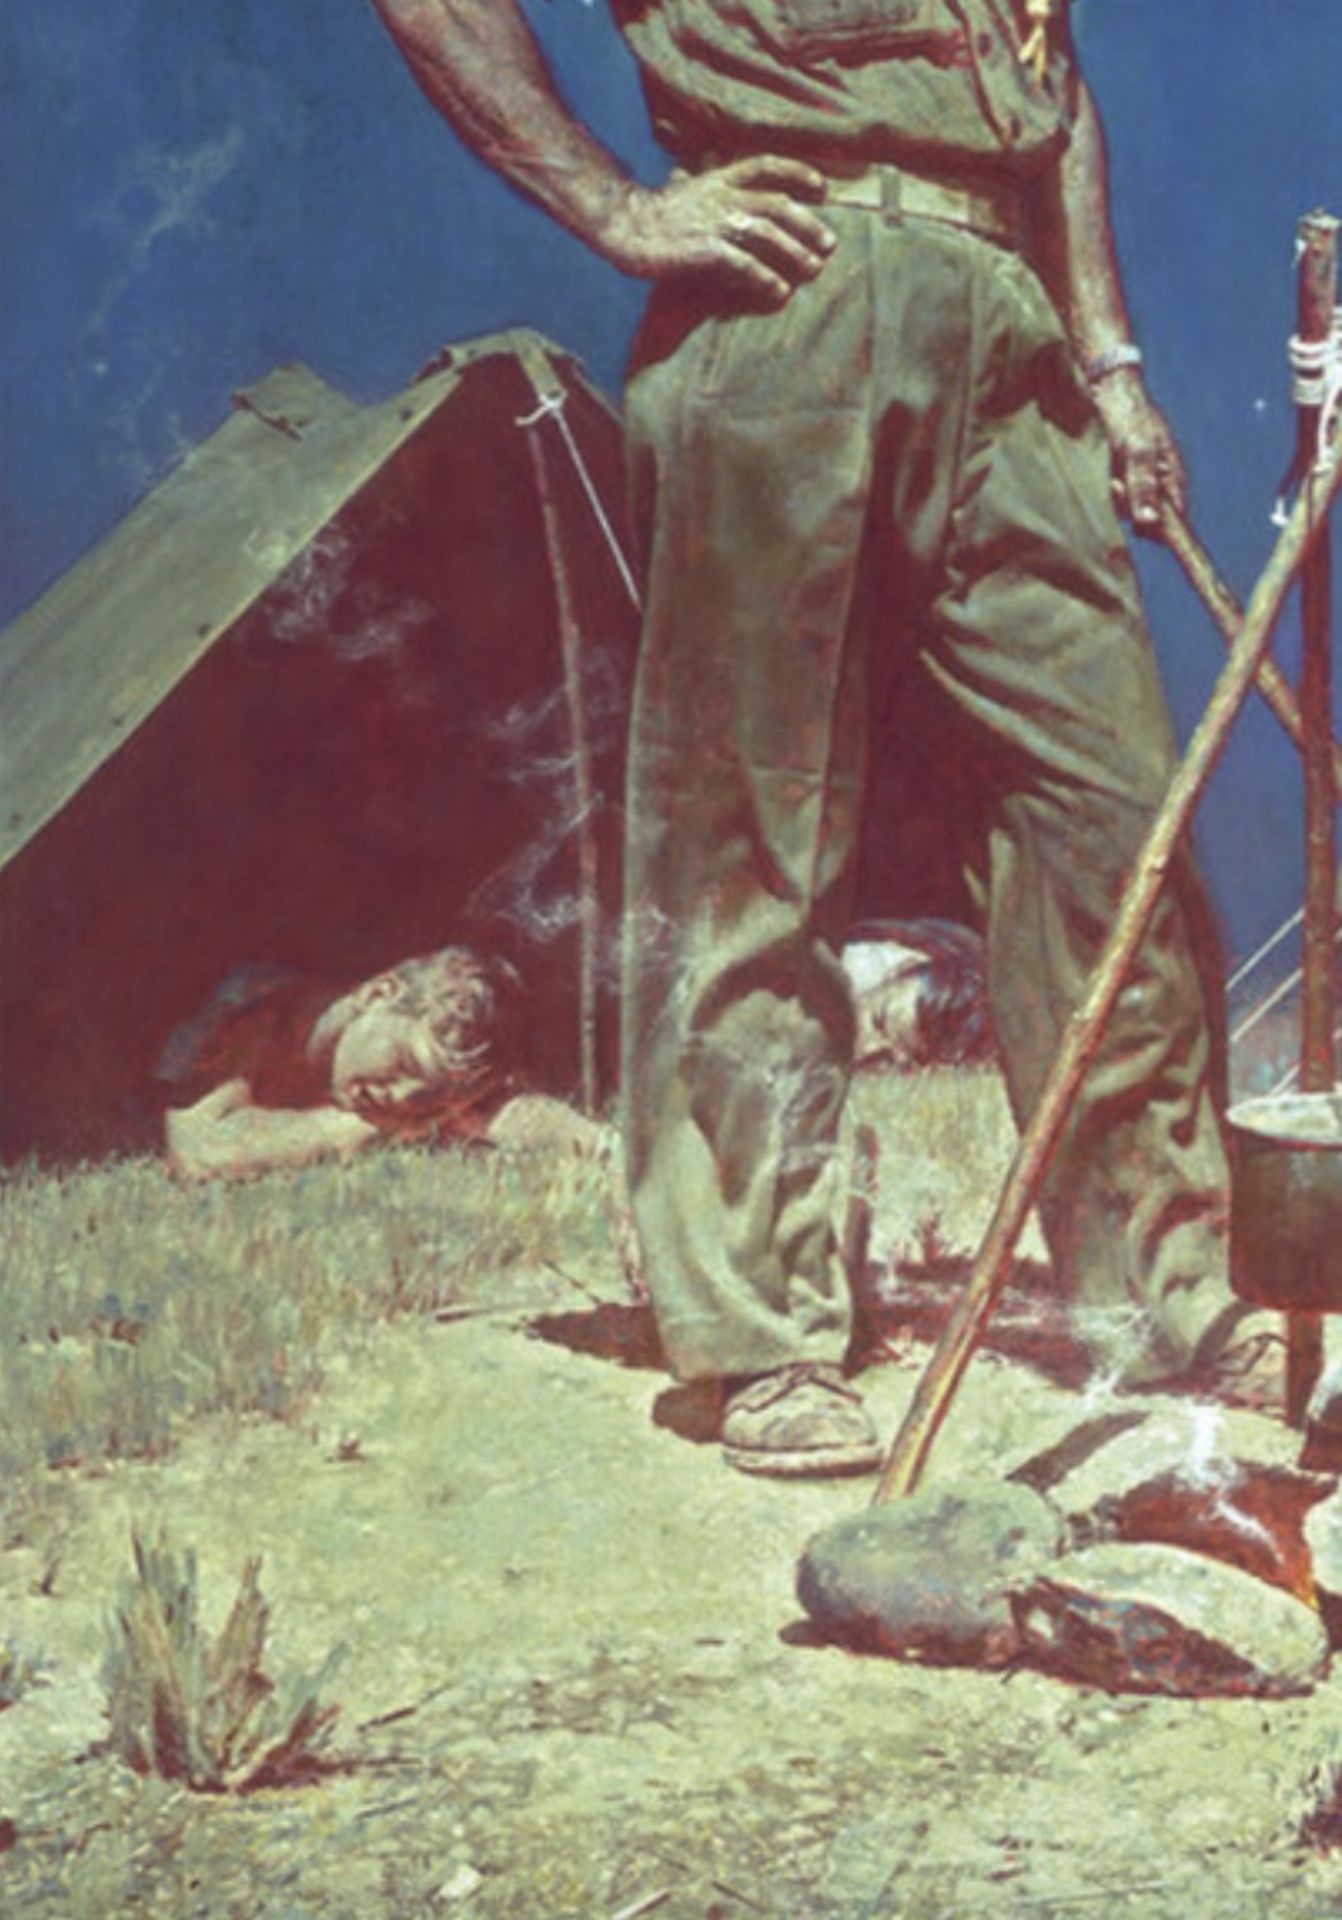 Norman Rockwell "The Scoutmaster, 1956" Offset Lithograph - Image 4 of 5